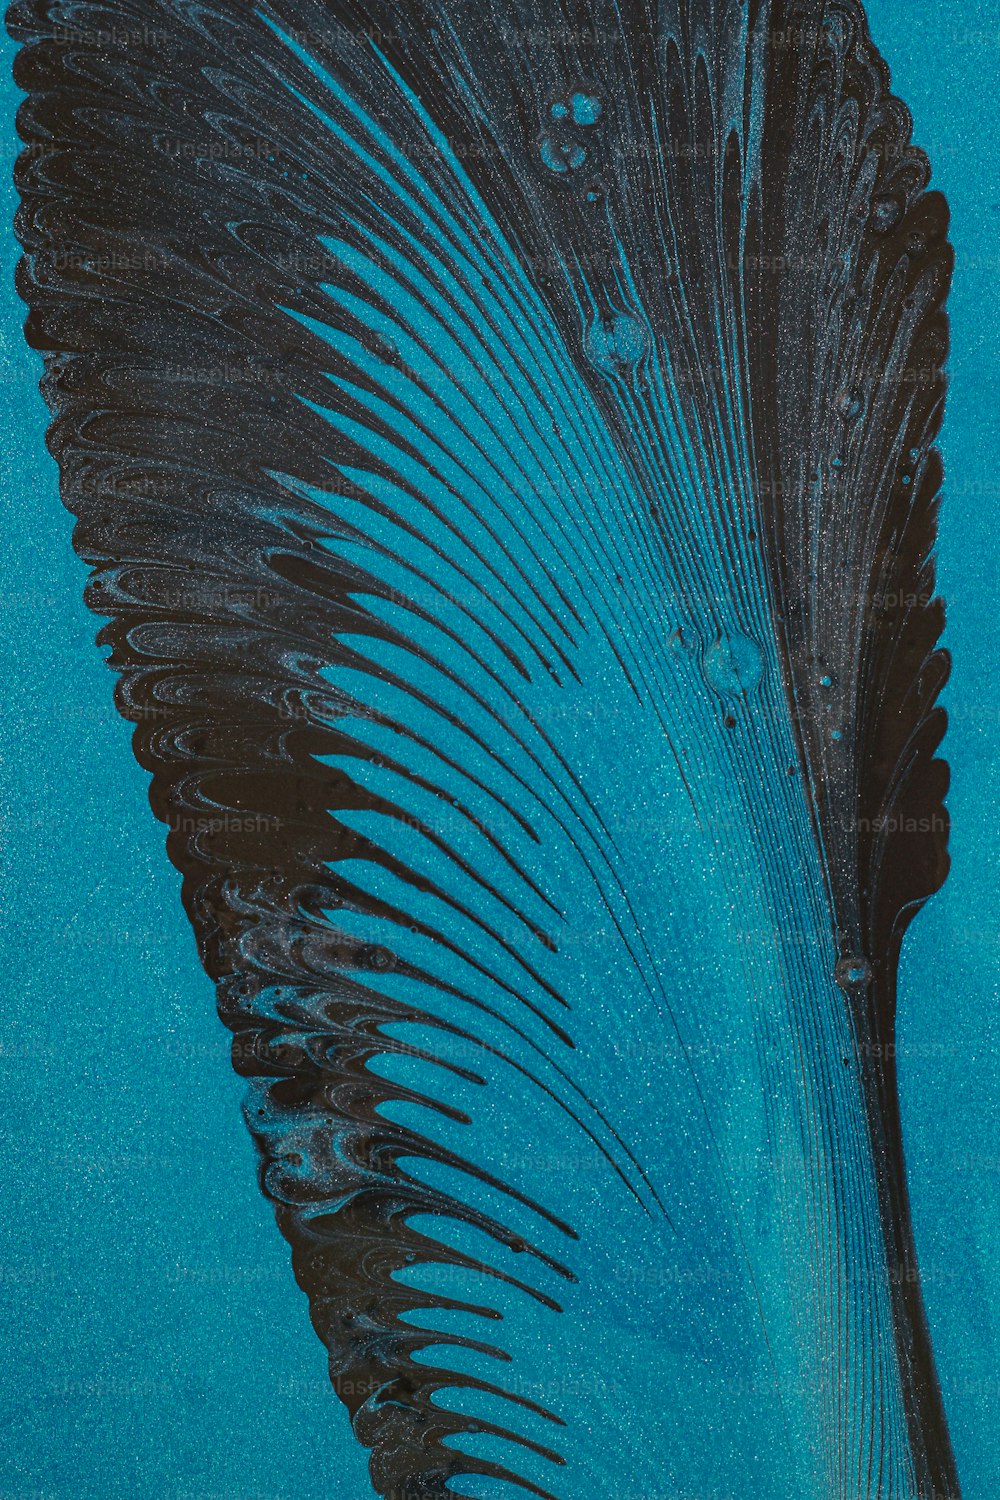 a close-up of a blue feather